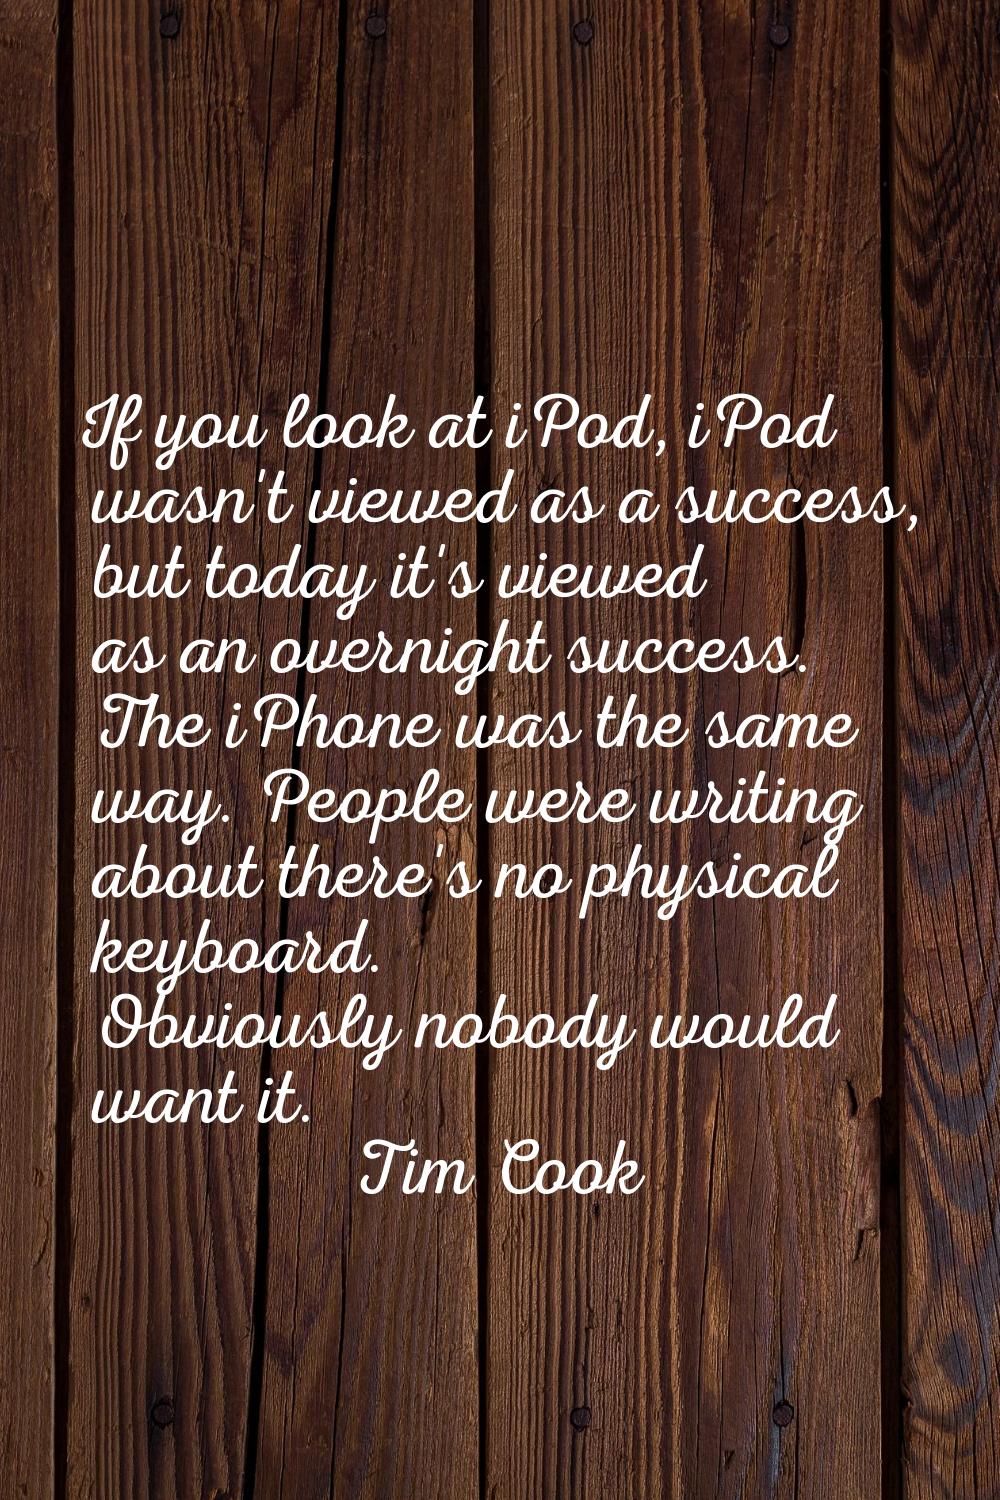 If you look at iPod, iPod wasn't viewed as a success, but today it's viewed as an overnight success